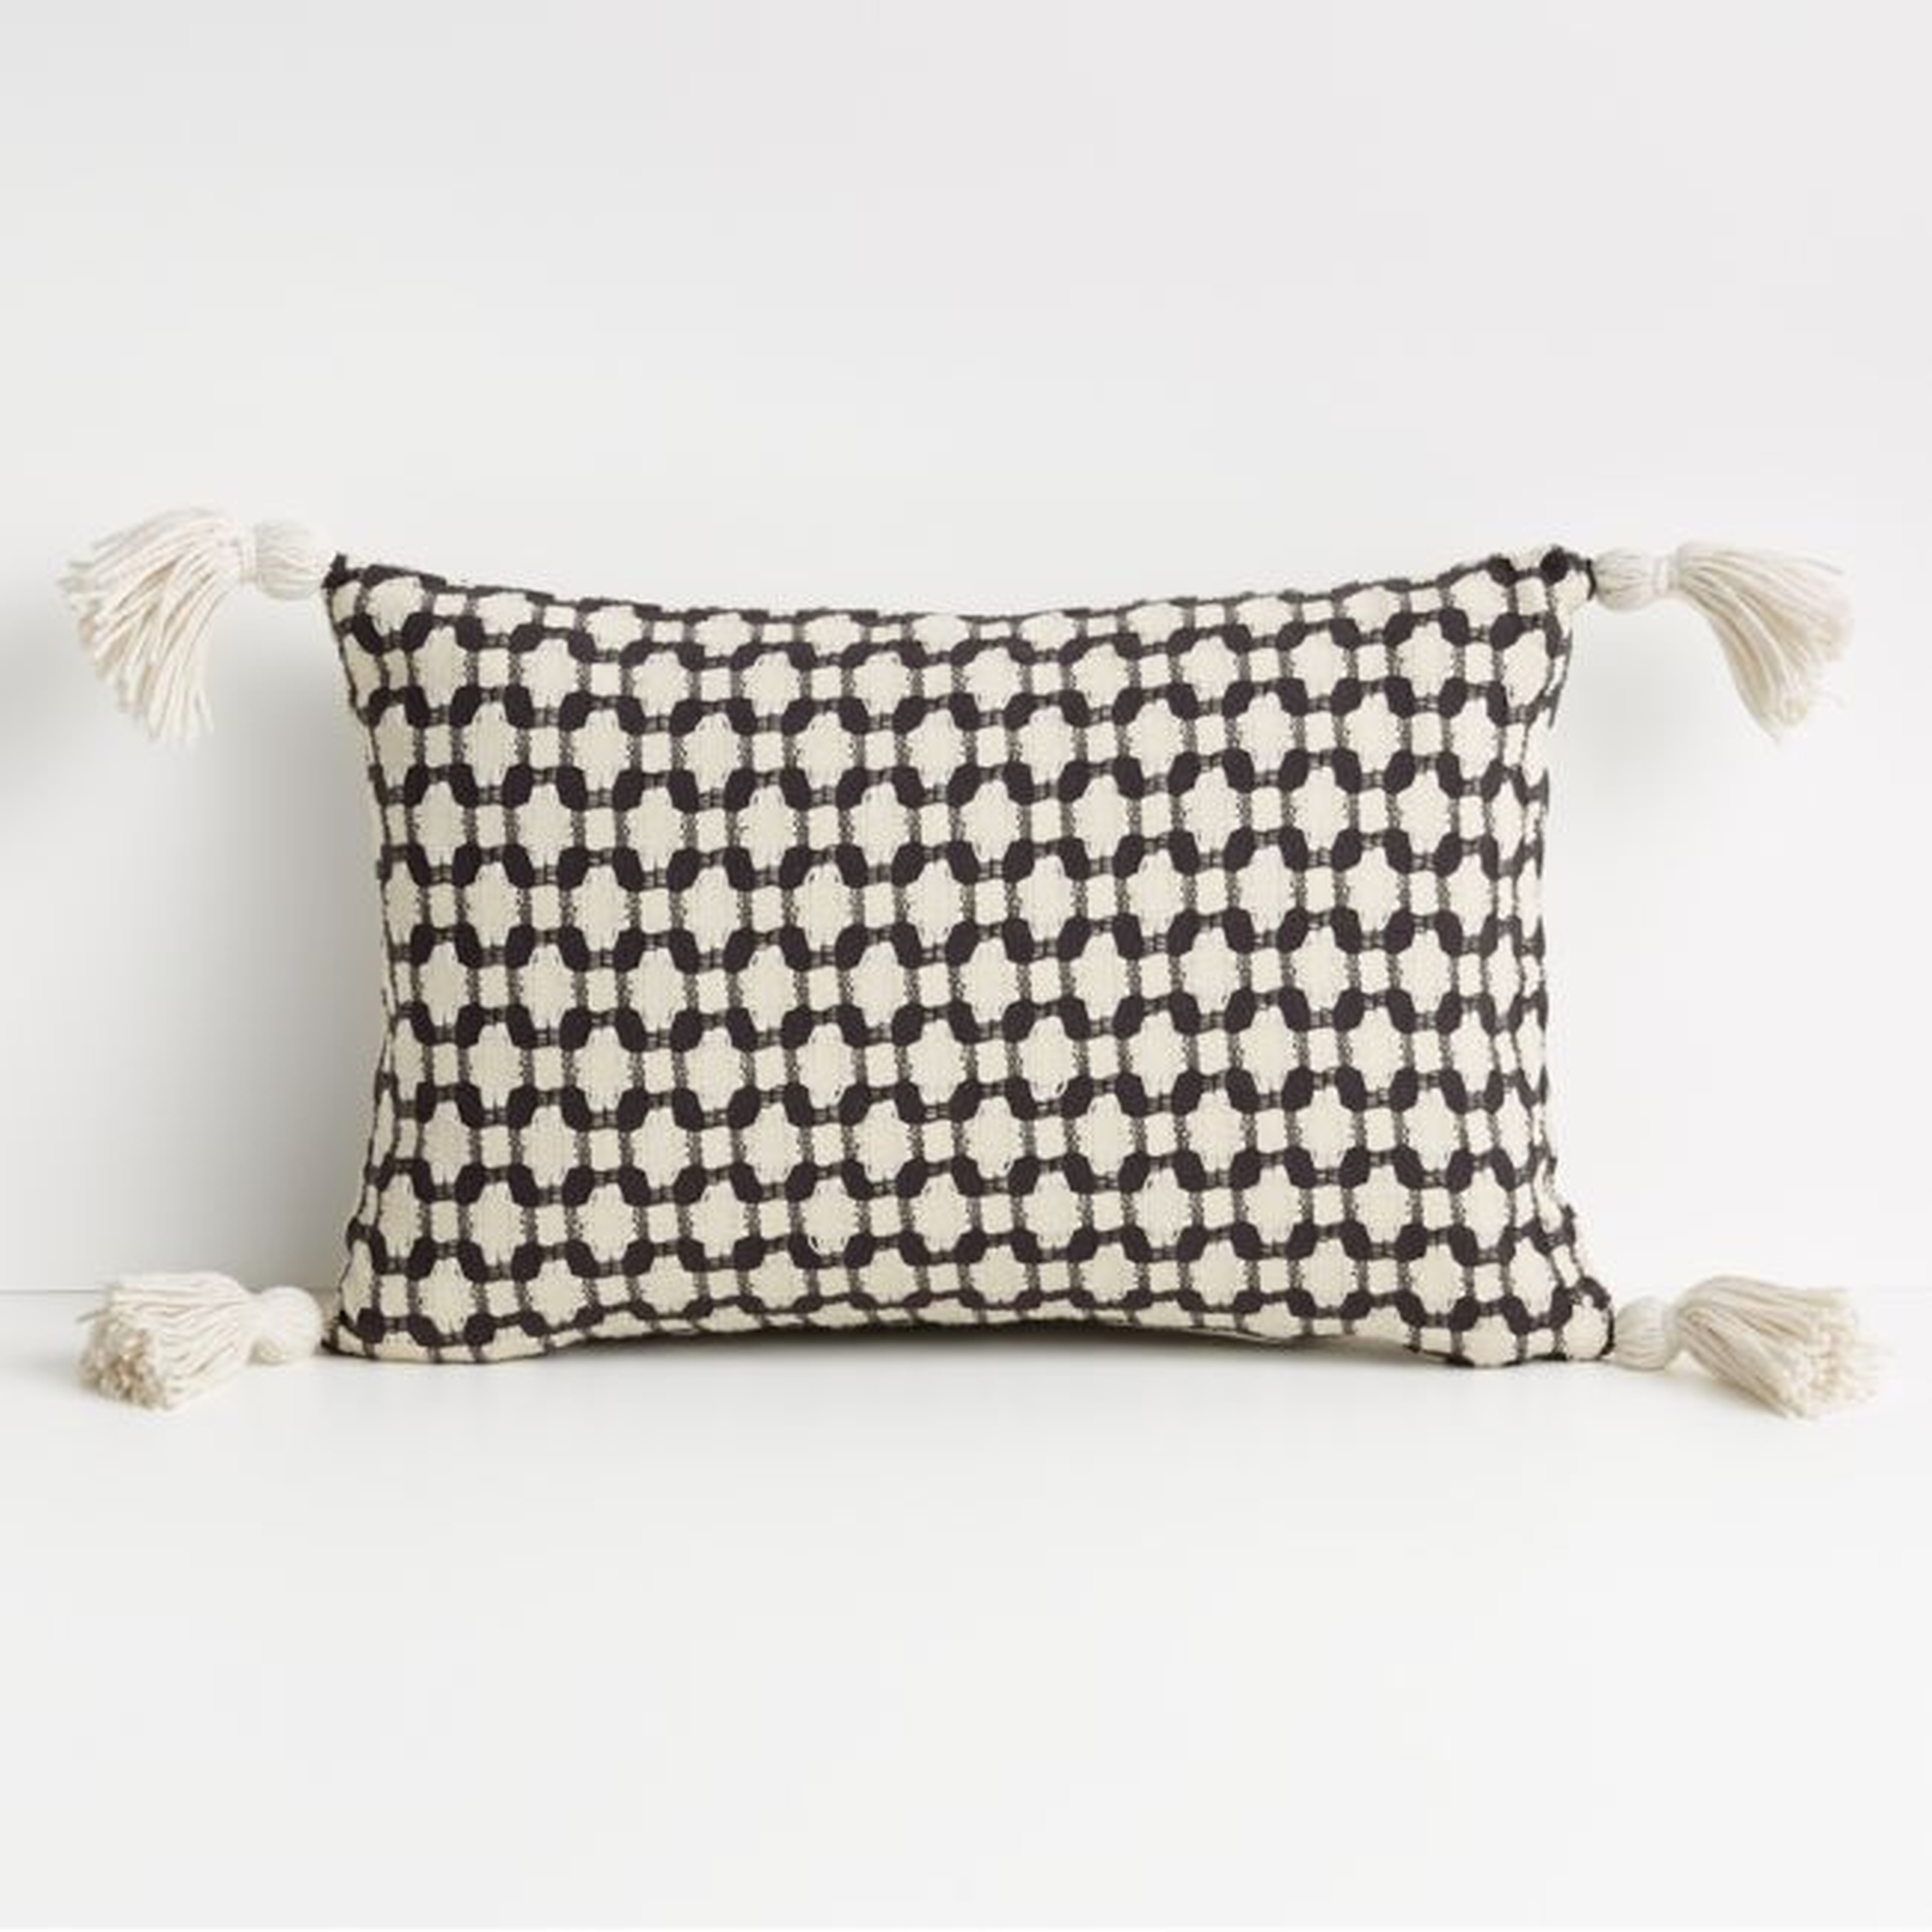 Tahona Textured Pillow Cover, Obsidian, 18" x 12" - Crate and Barrel